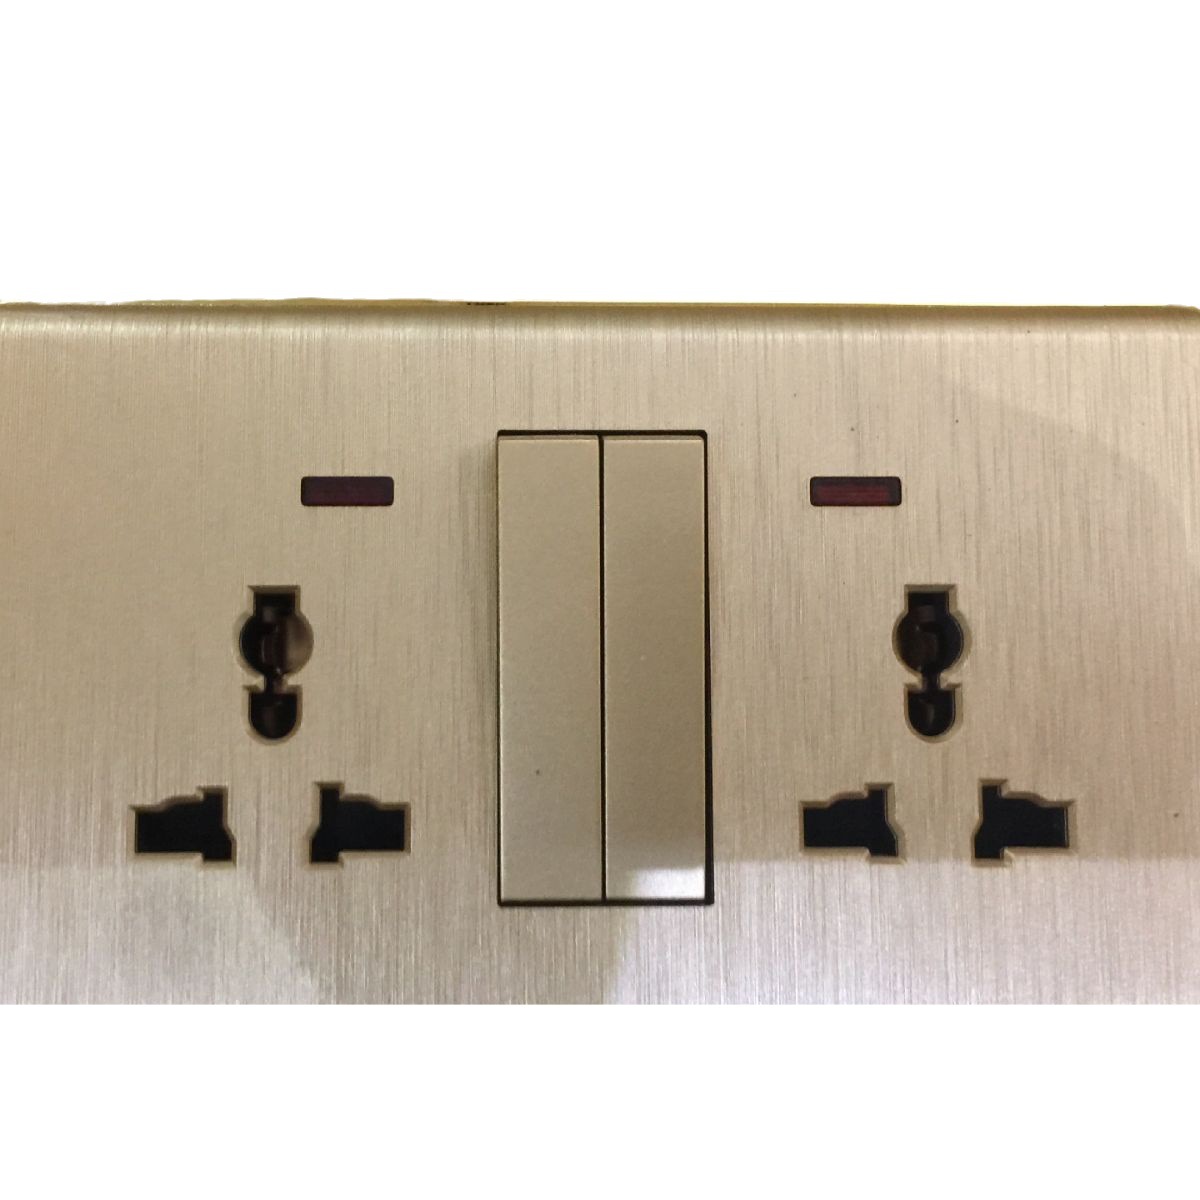 Hotel Waterproof Energy Saving Safety Uk Standard Wall Light Switches And Socket